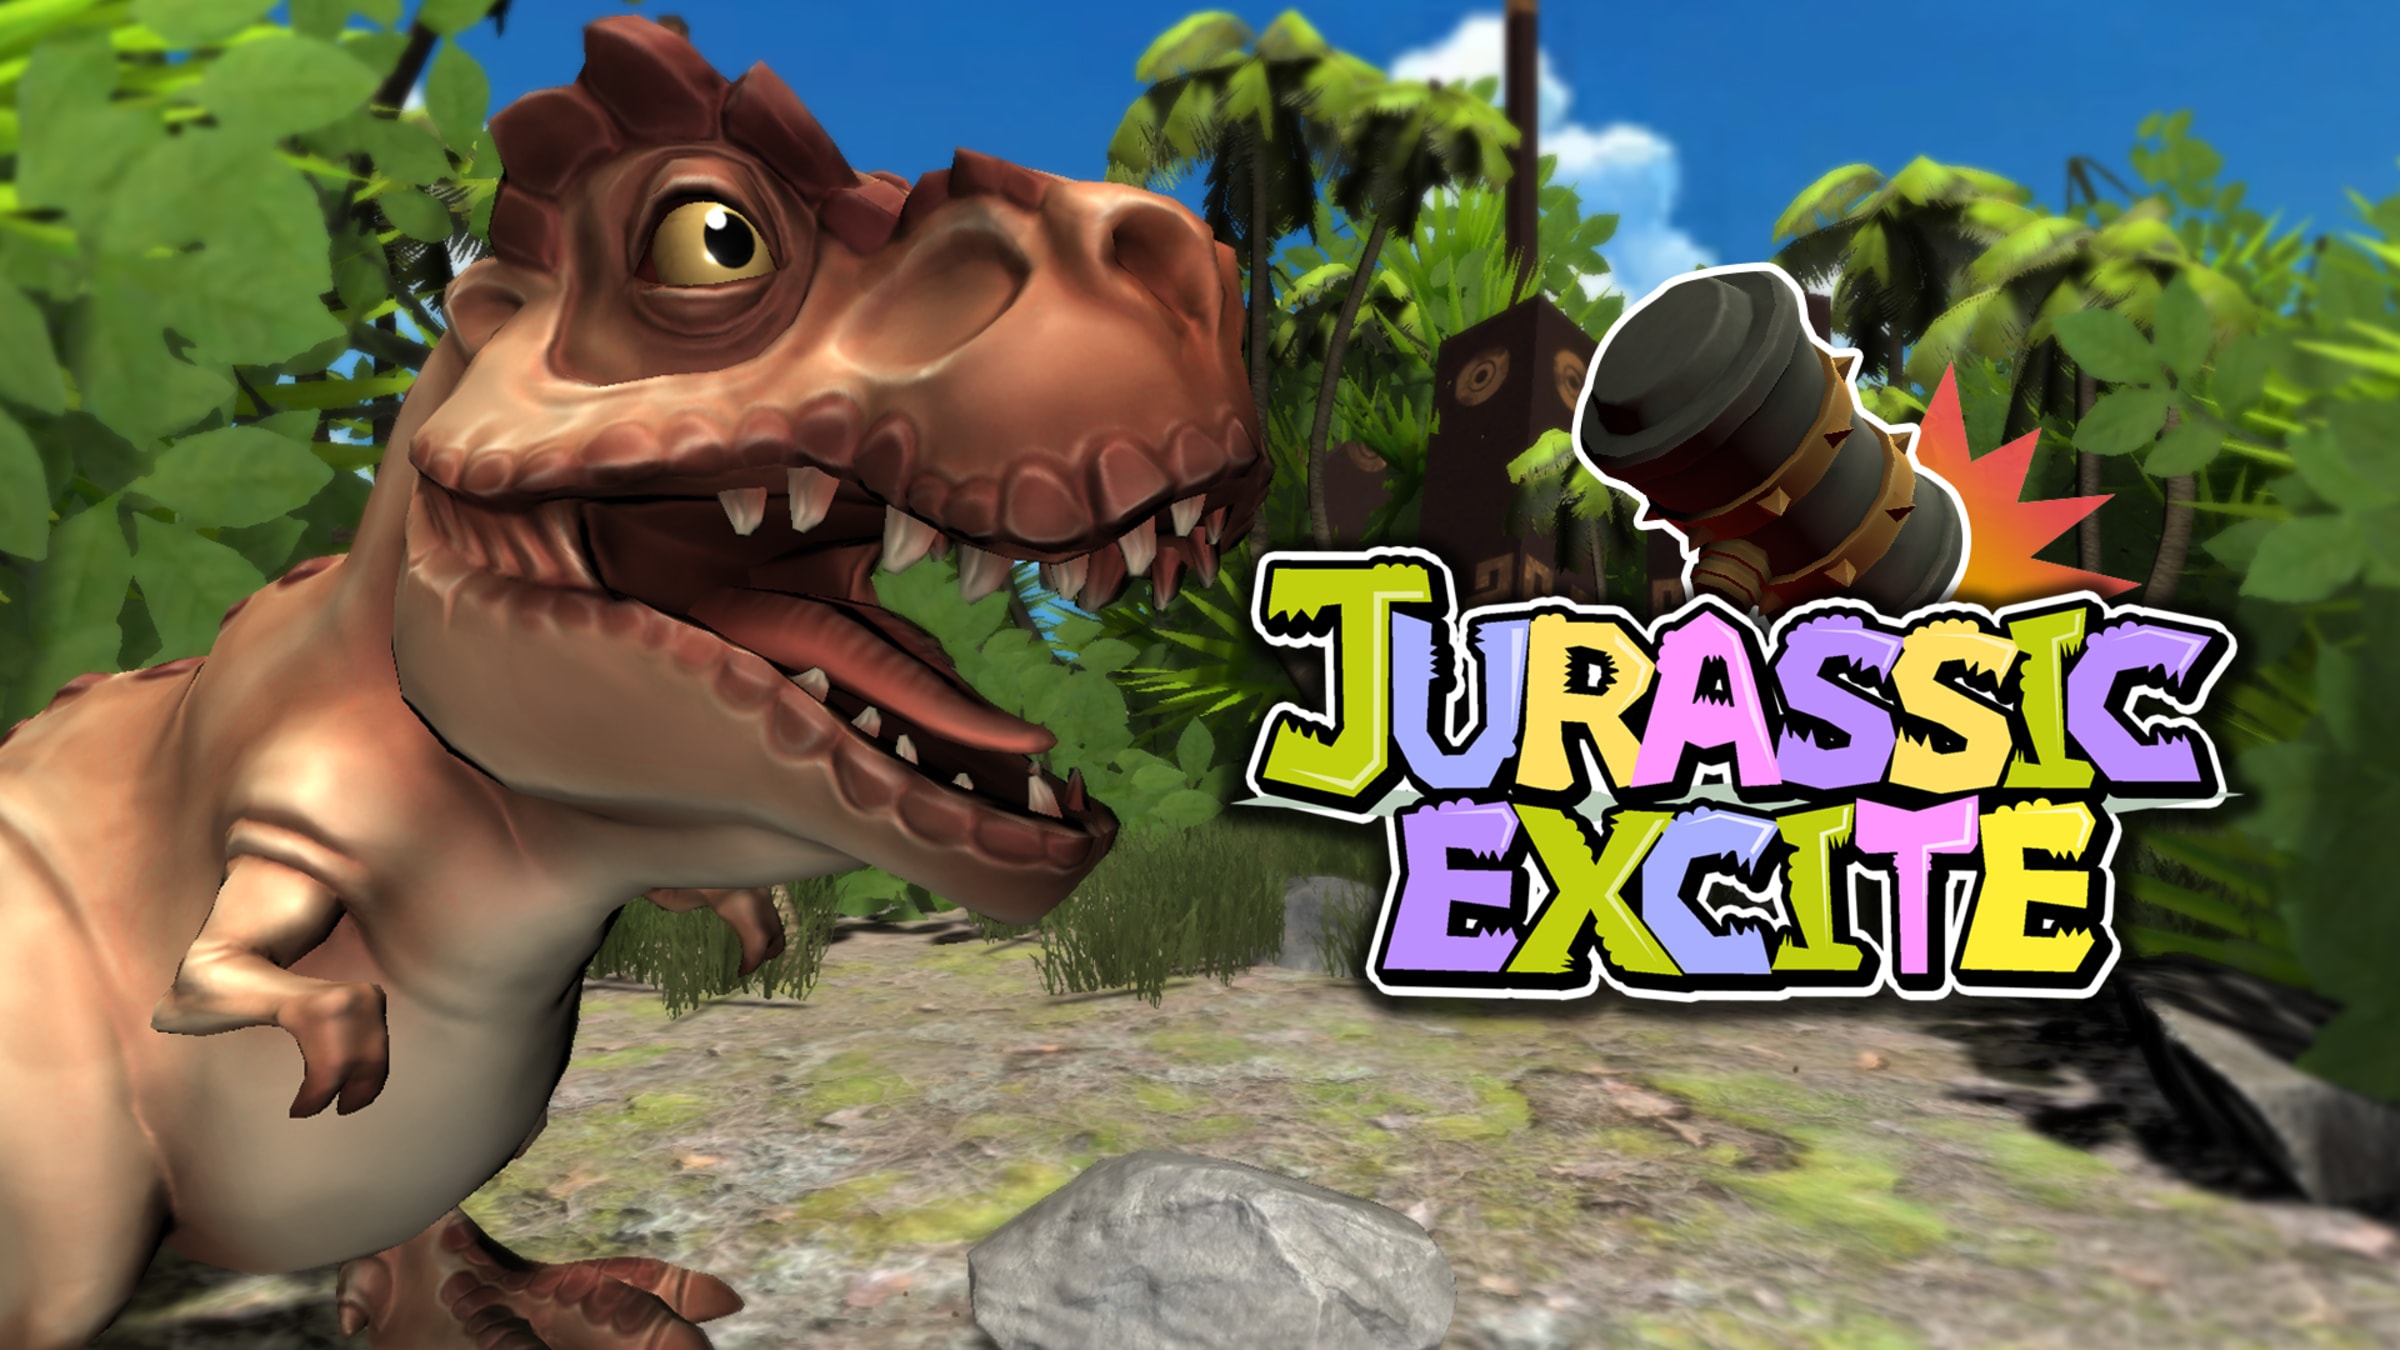 Jurassic Excite for Nintendo Switch - Nintendo Official Site